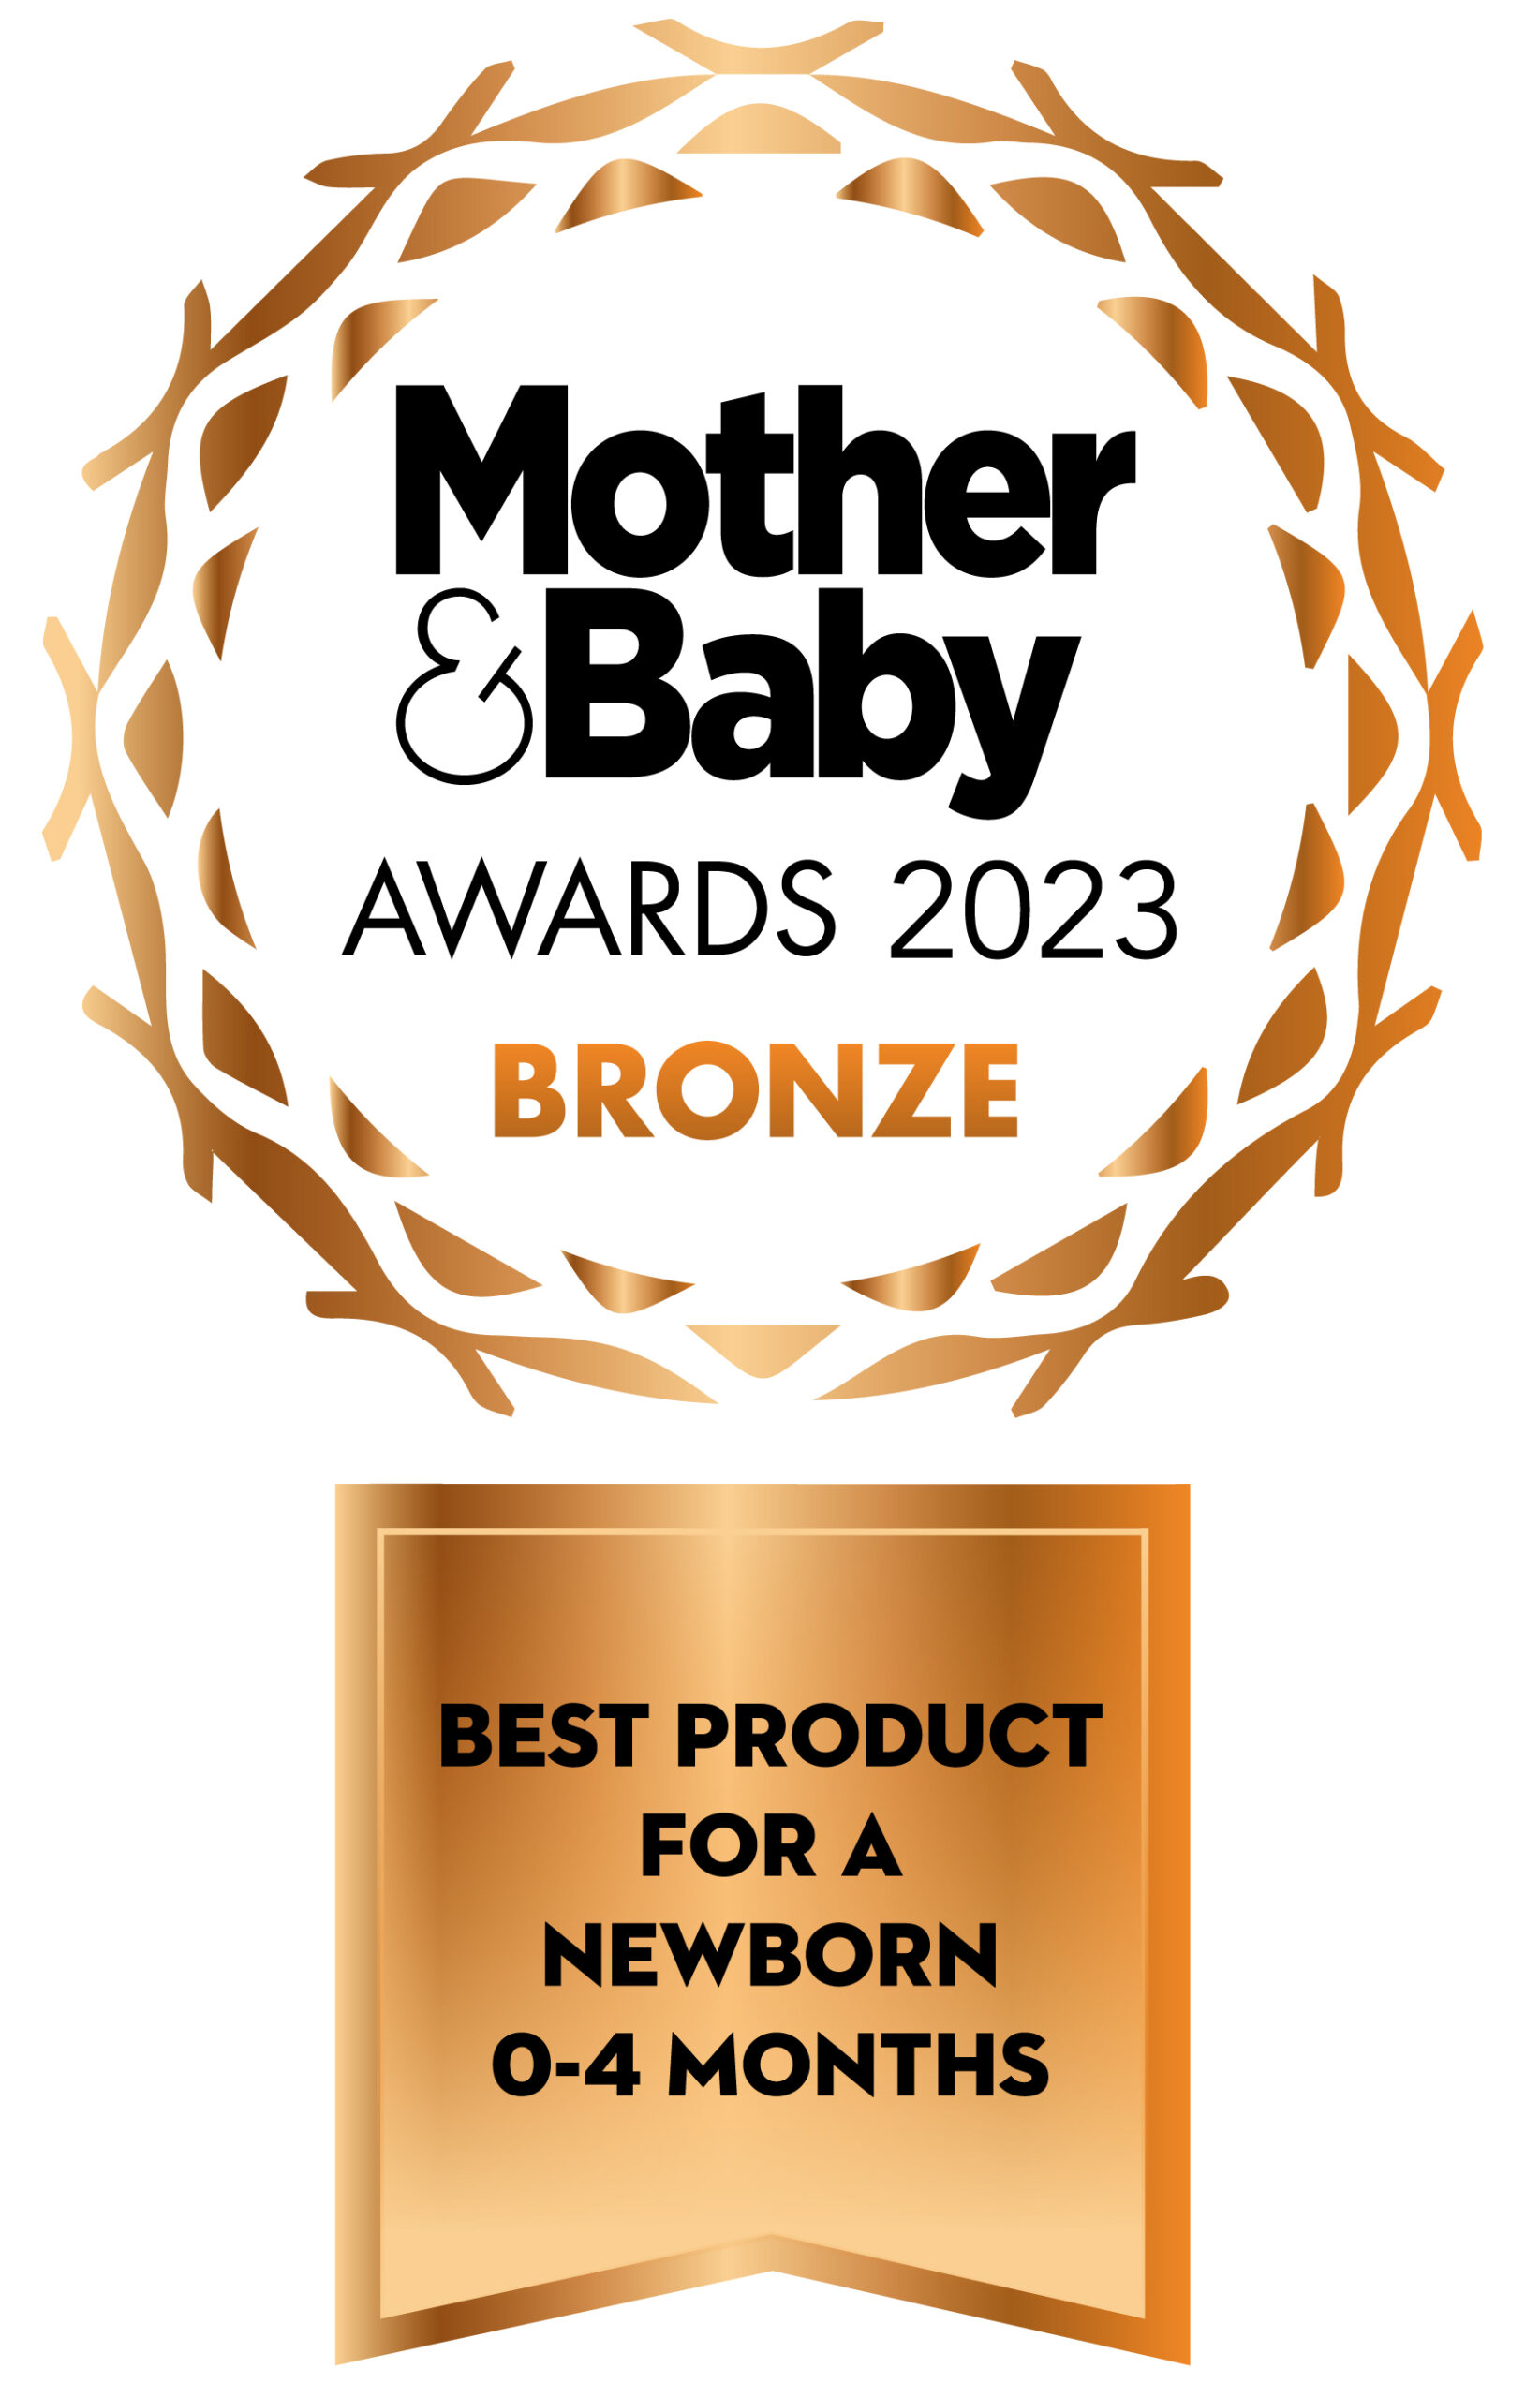 Comfort Soother Best Product for a Newborn - Bronze